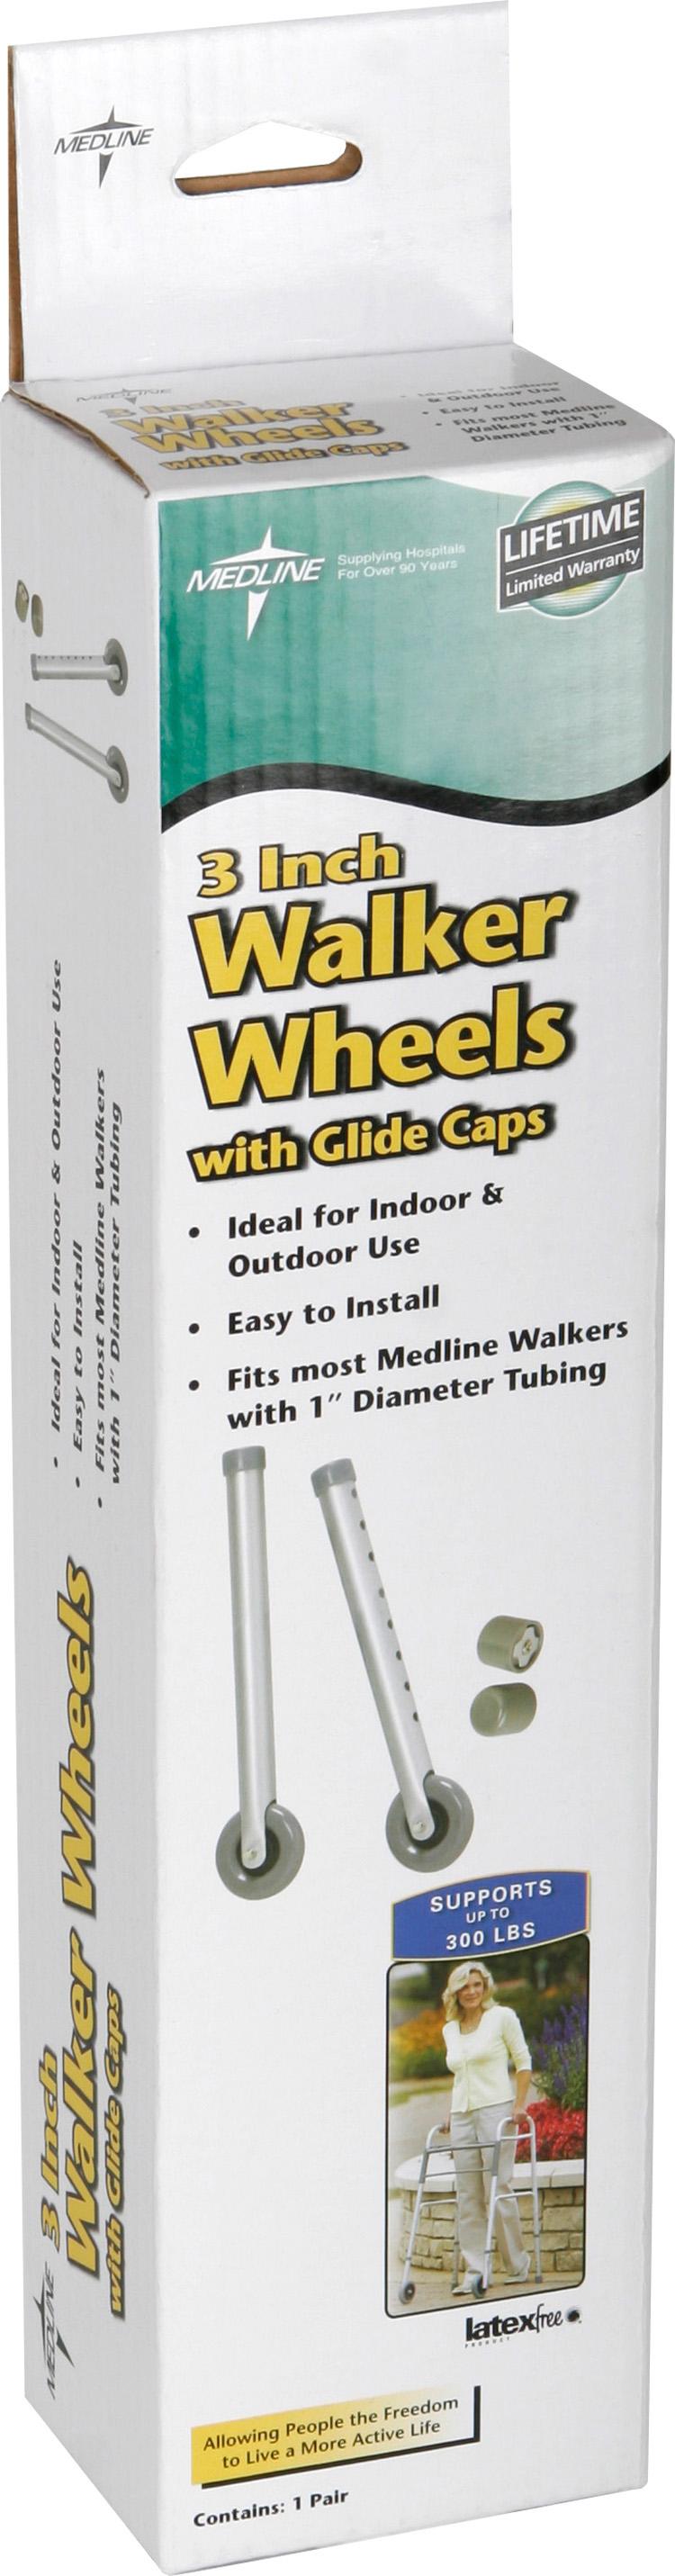 2 Each-Set / No / 300.00 LB Patient Safety & Mobility - MEDLINE - Wasatch Medical Supply